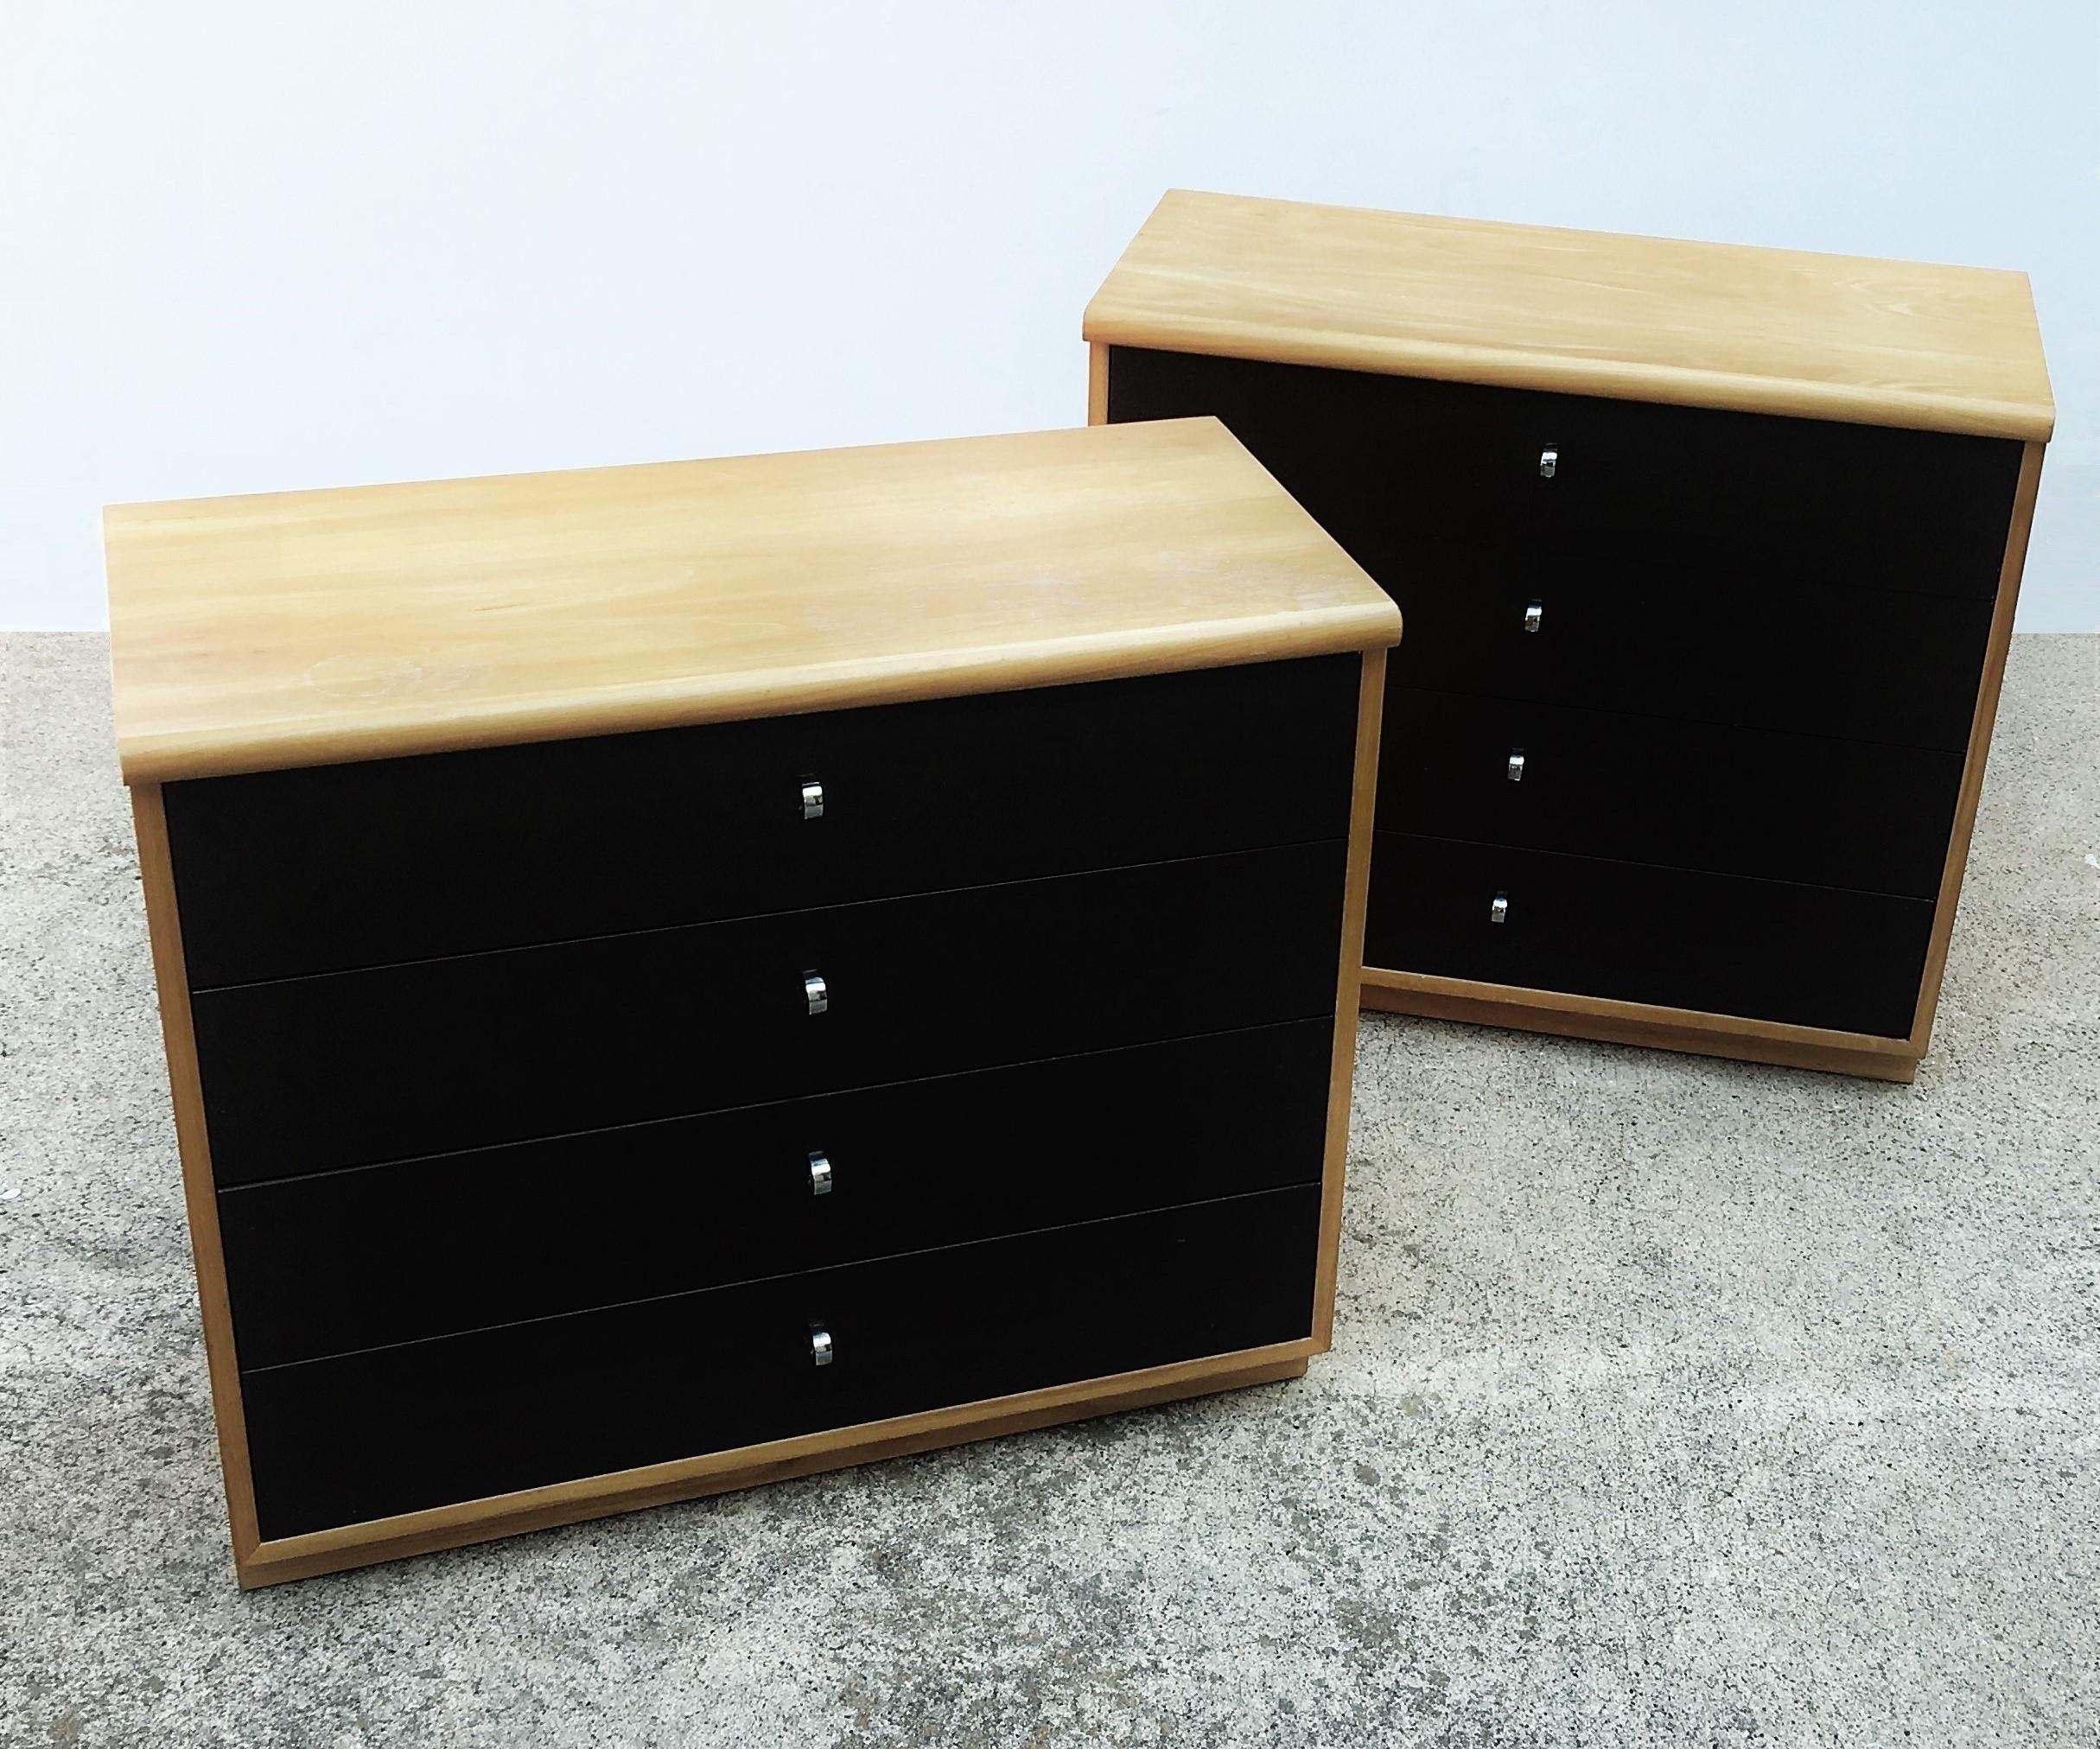 Modern & Minimalist in design this pair of nightstands/bachelors chests designed by Jack Cartwright for Founders Furniture has clean lines and quiet excitement with the lustrous clear lacquered birch wood and the white lacquered drawer fronts with